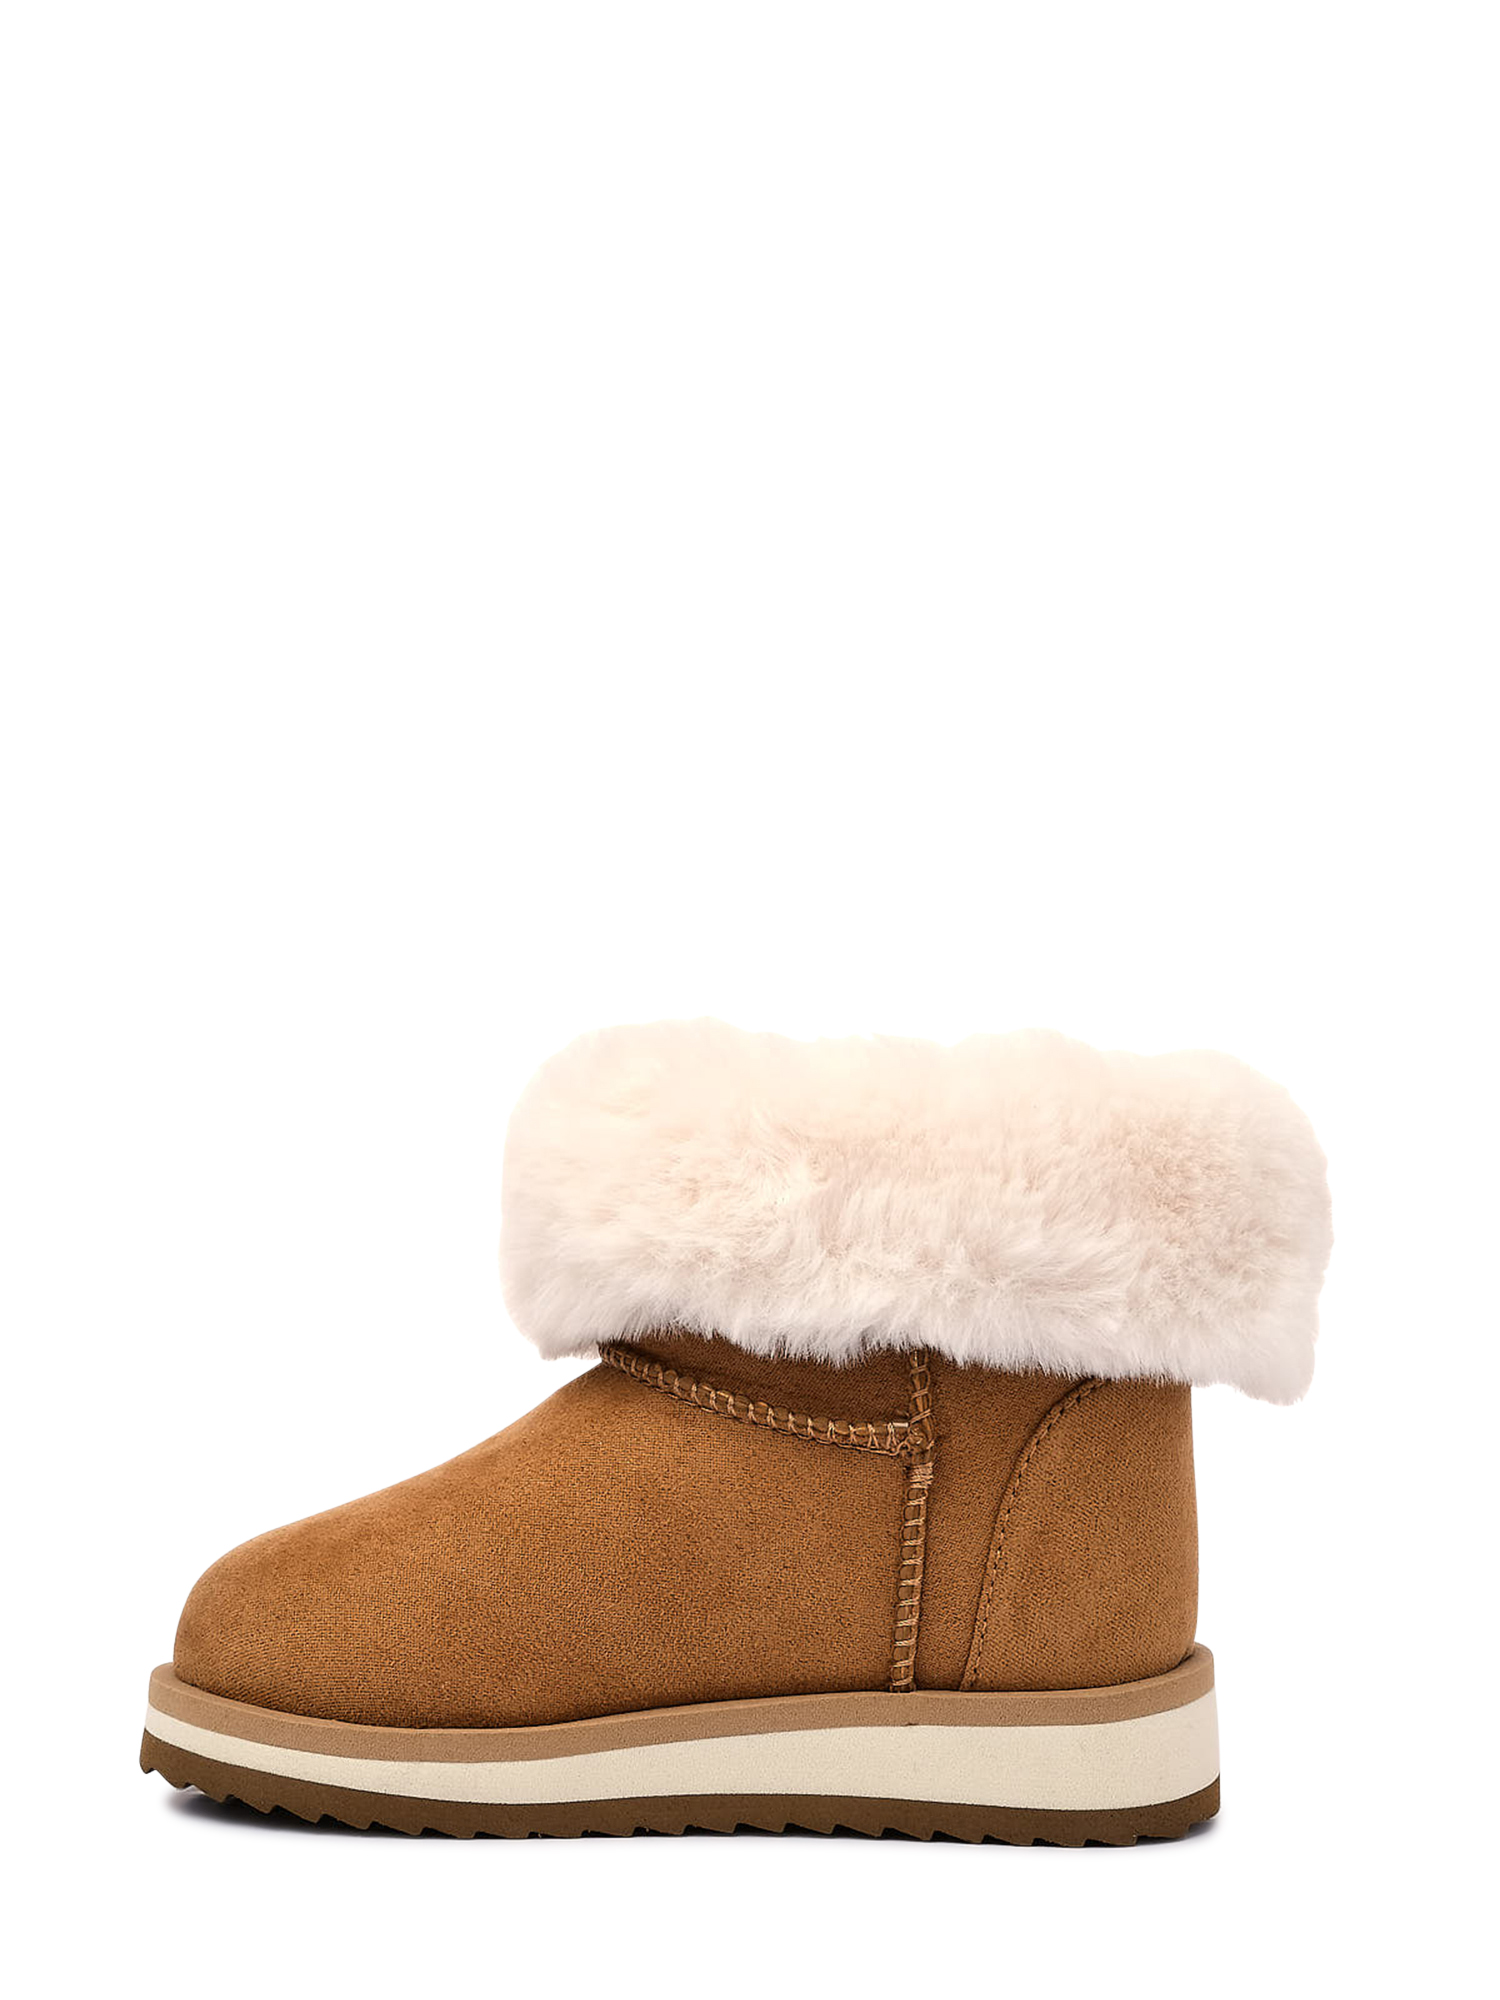 Best 25+ Deals for Ugg Boots With Bows